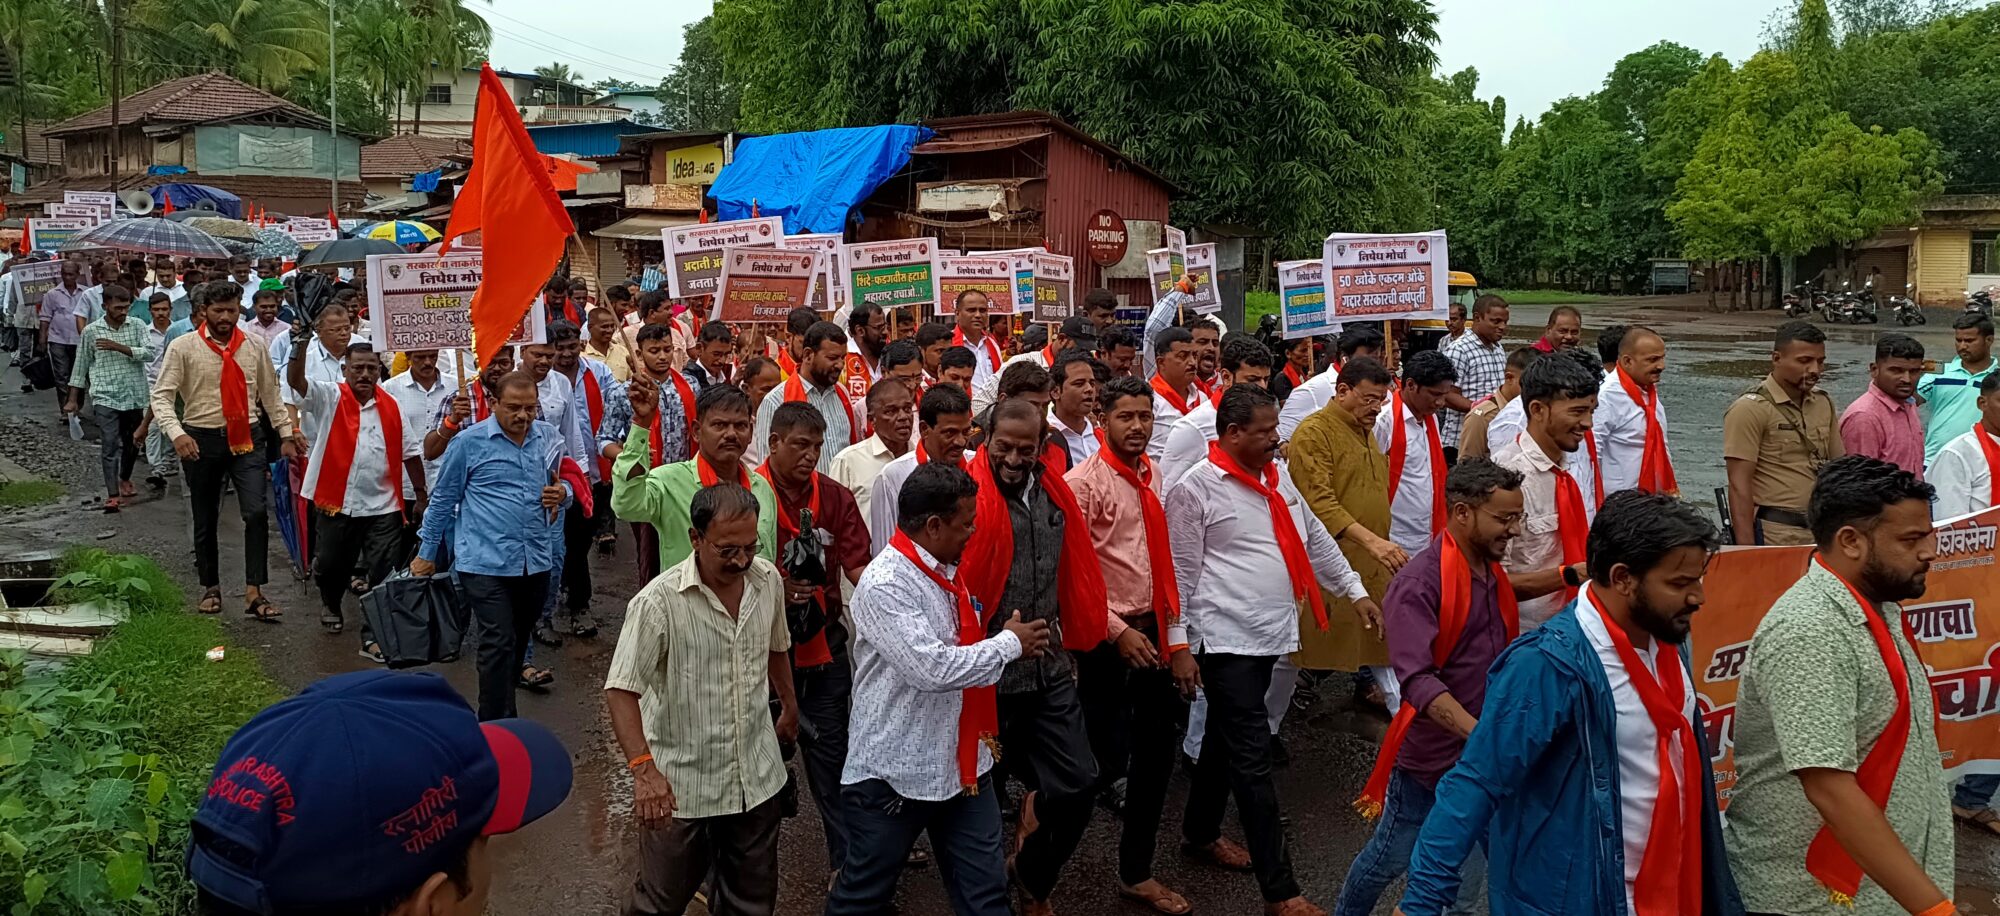 Protest march in Guhagar today